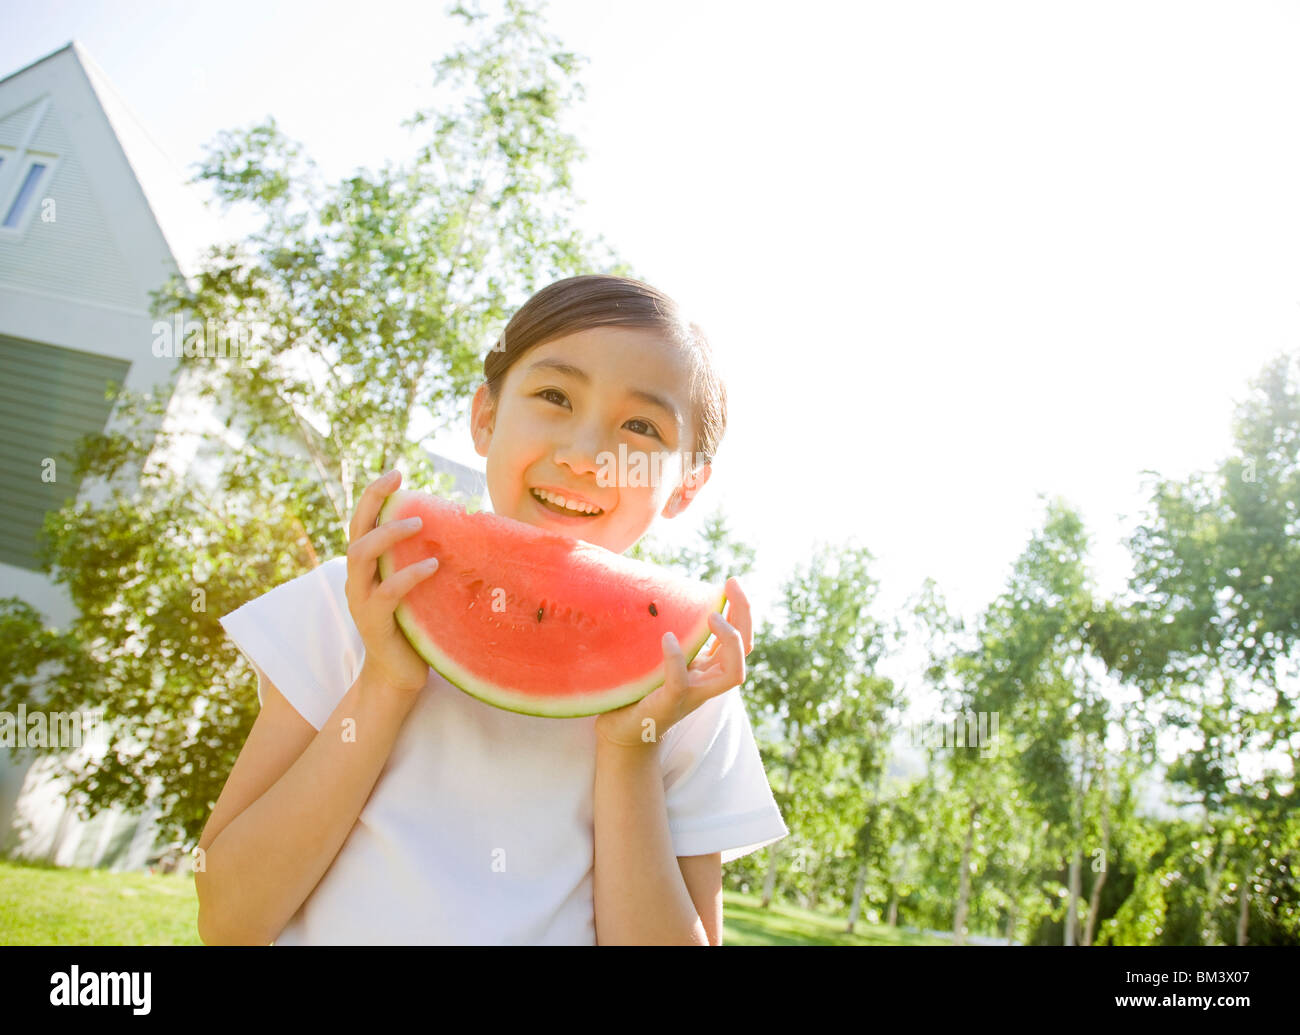 Smiling Girl Holding a Slice of Watermelon Stock Photo